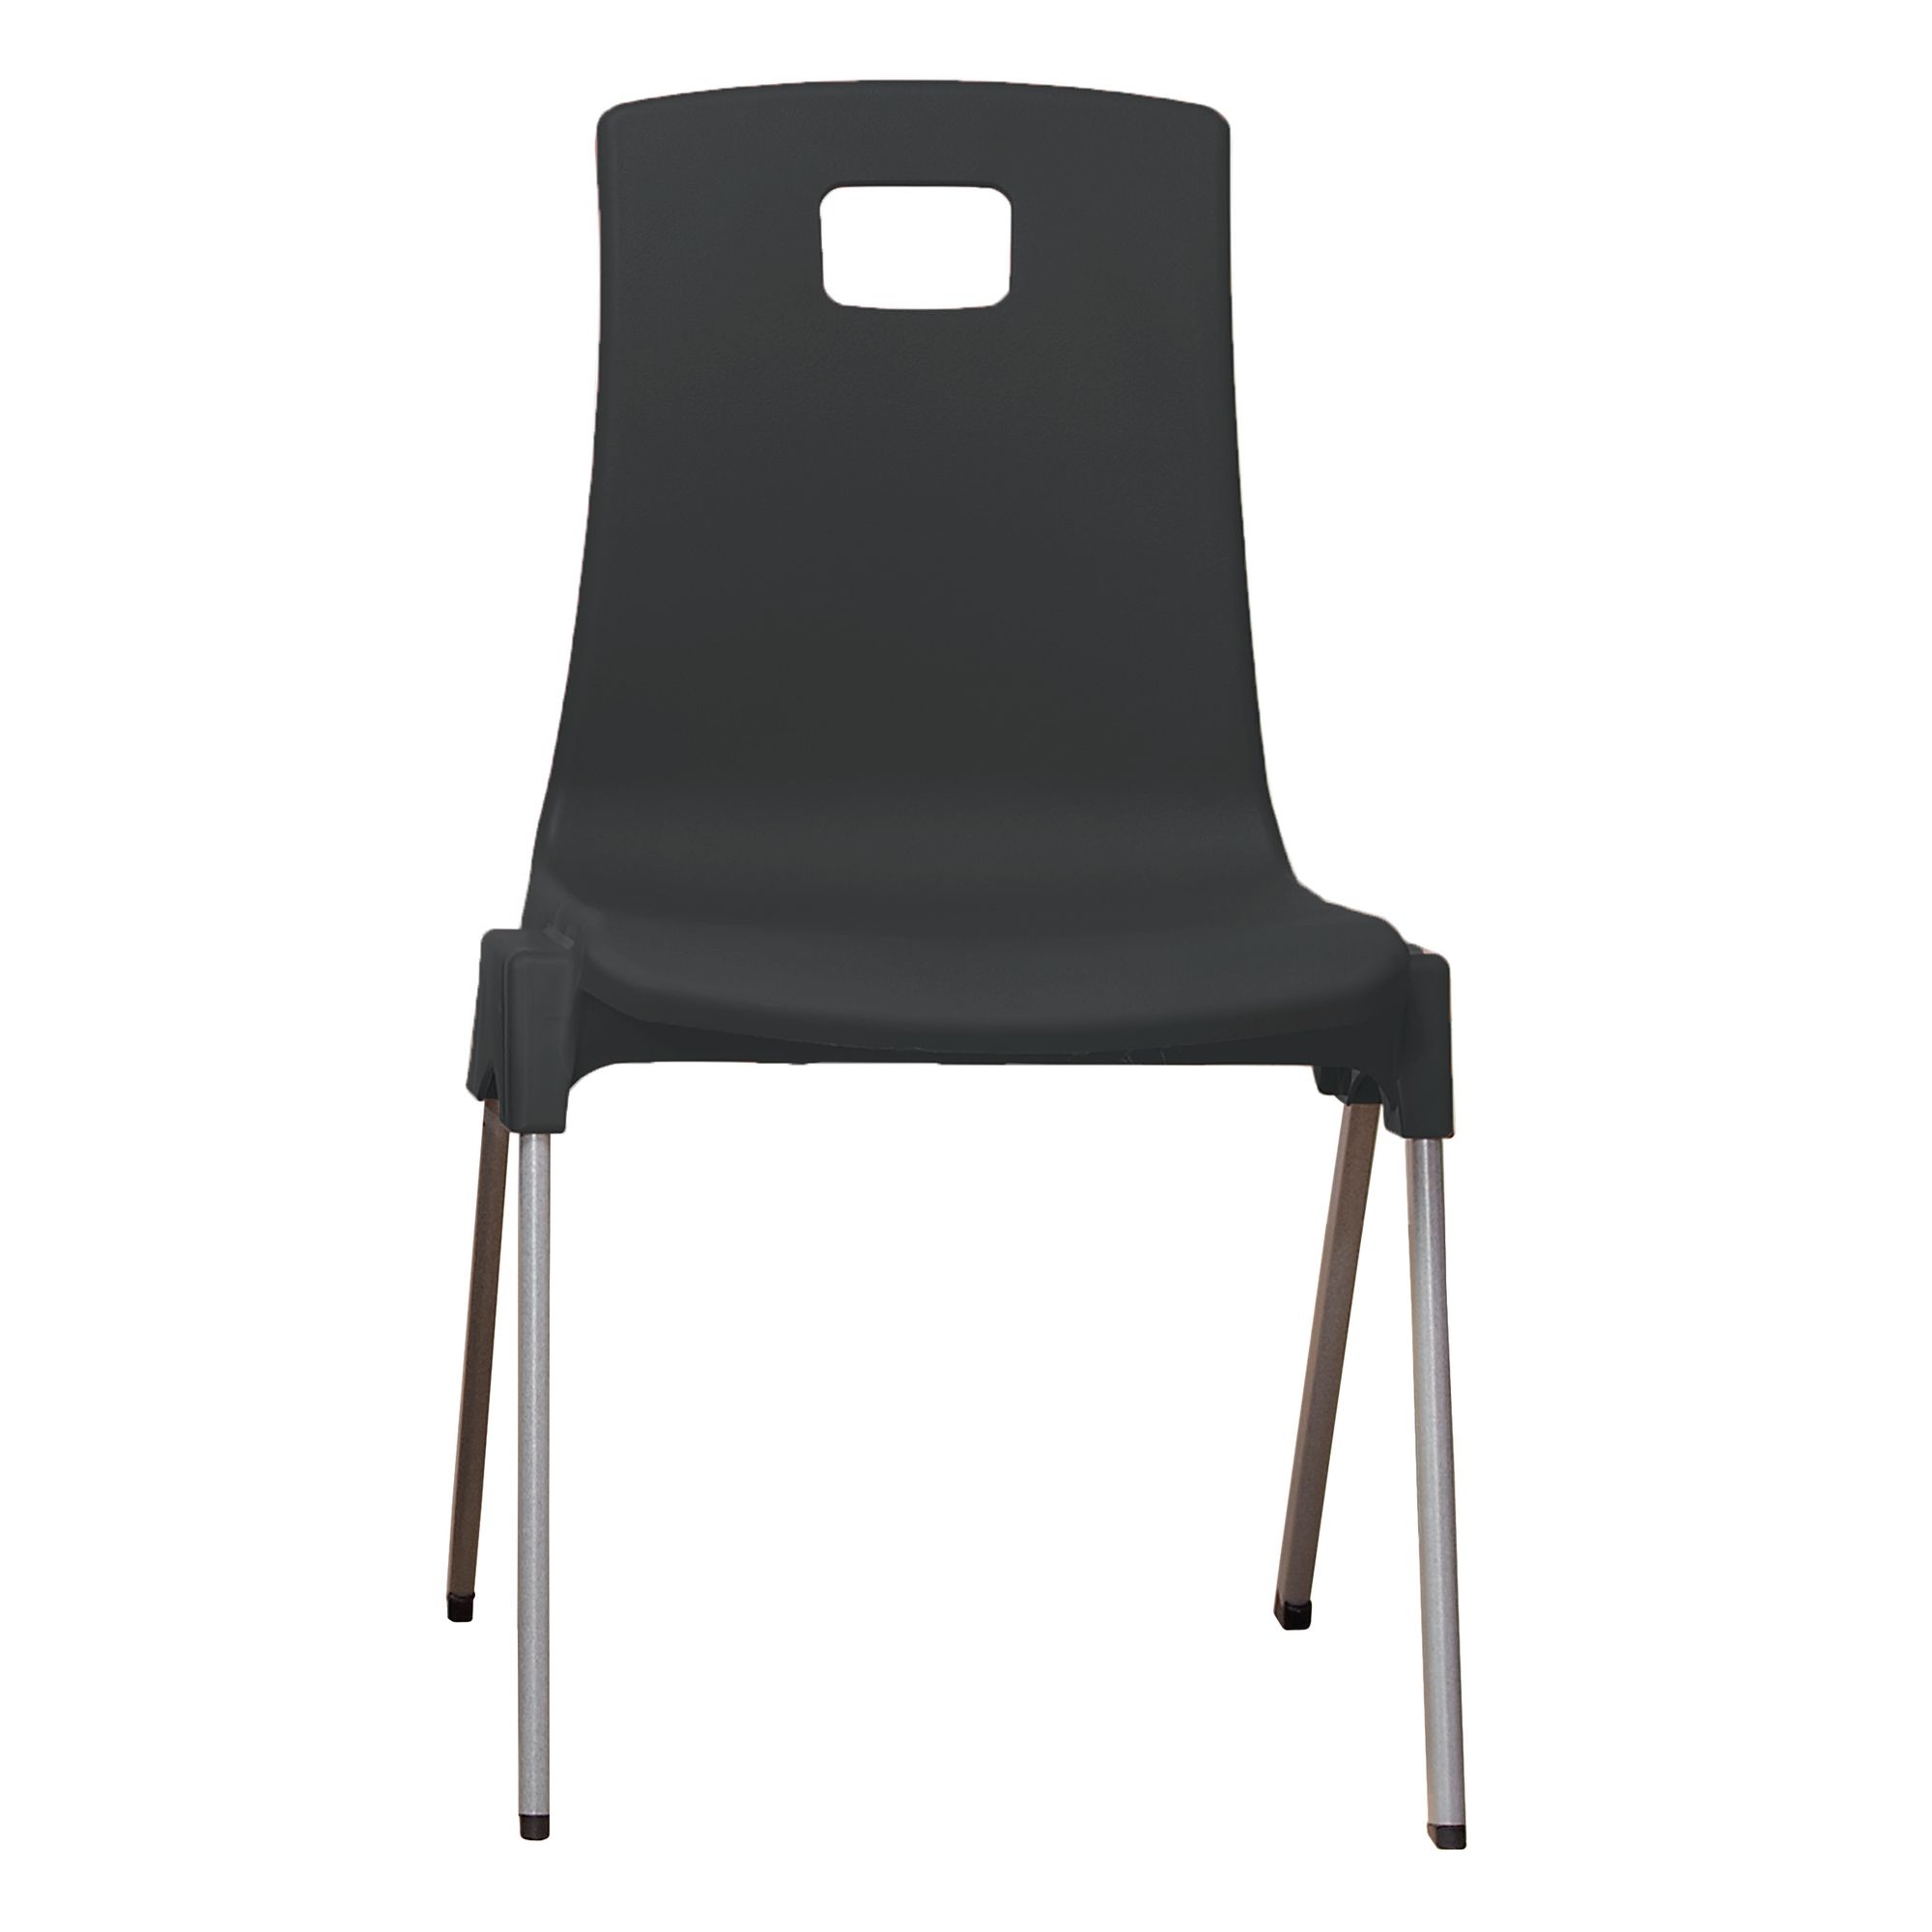 ST Chair - Size C - 350mm- Charcoal